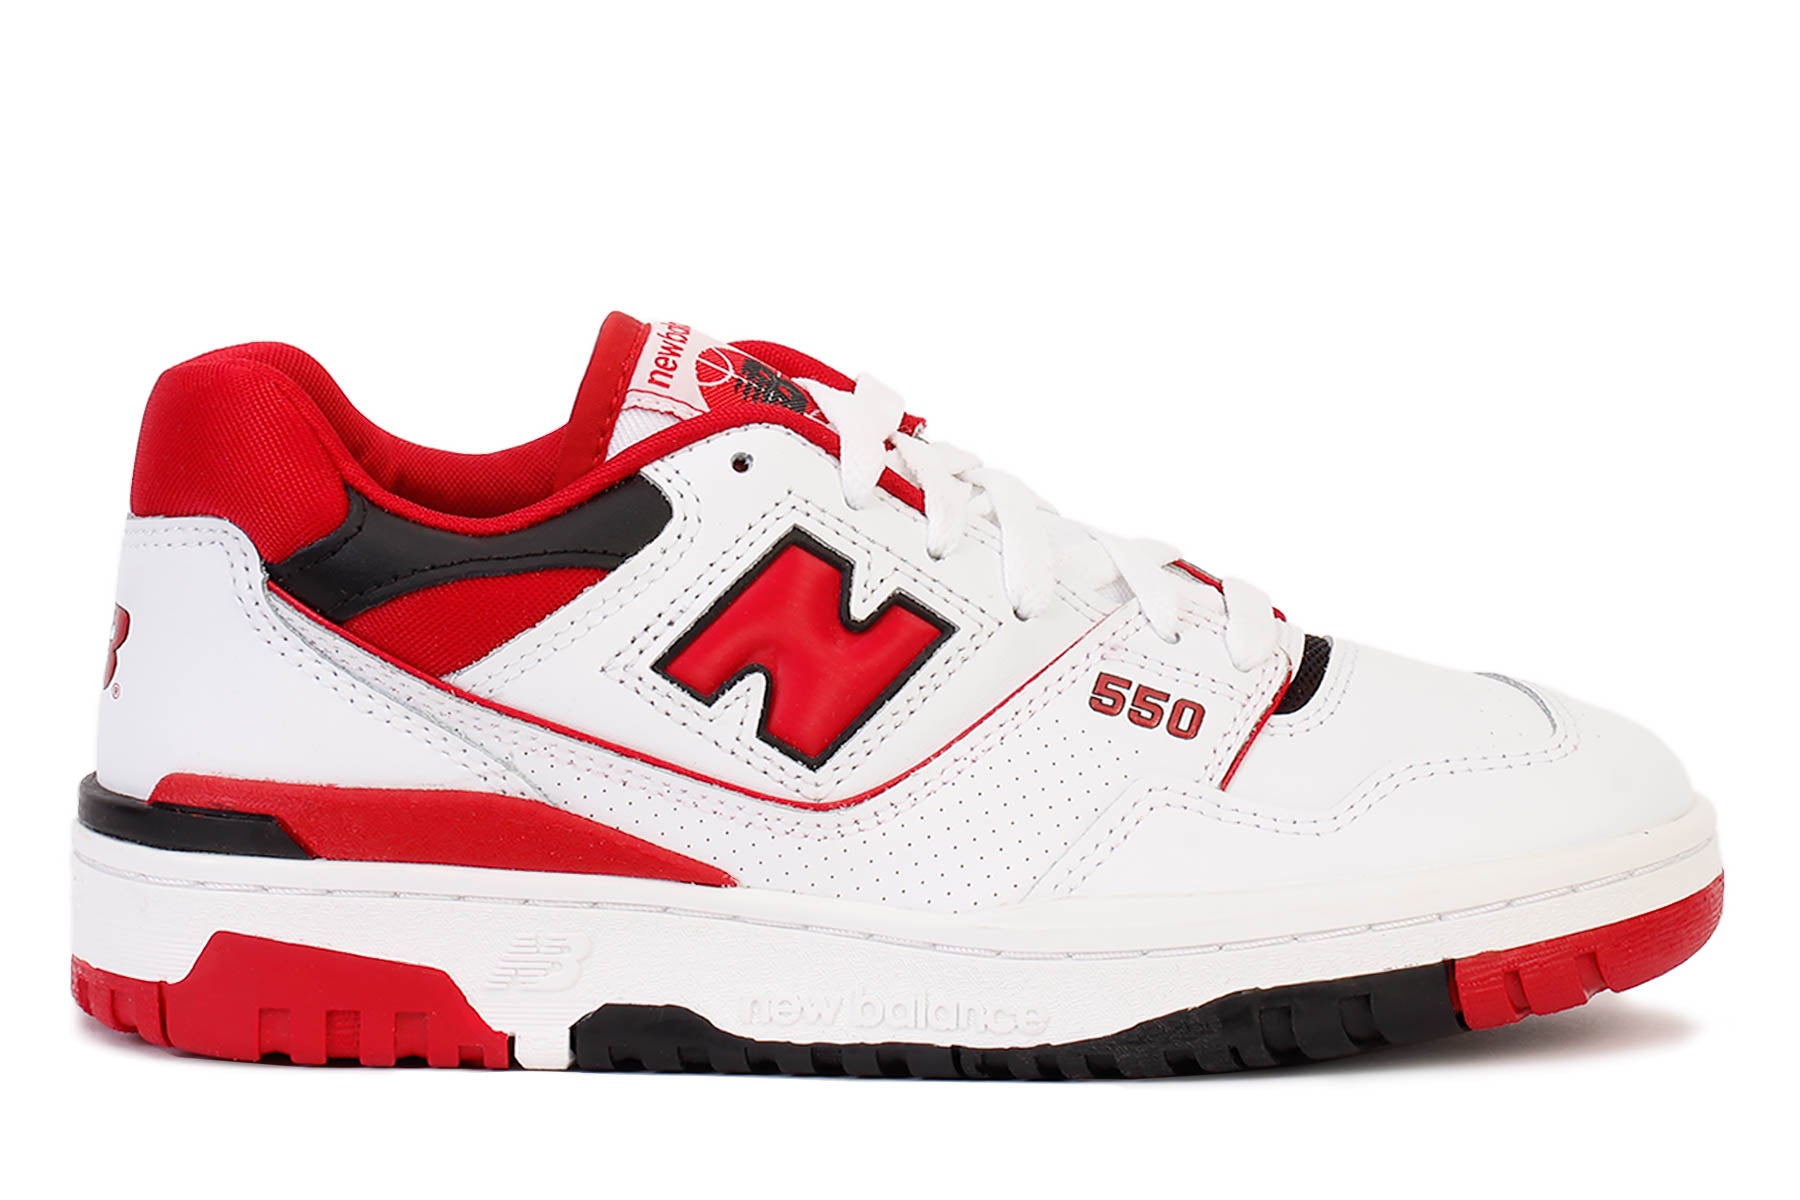 New Balance 550 NB White Team Red Men Unisex Casual Lifestyle Shoes  BB550SE1-D